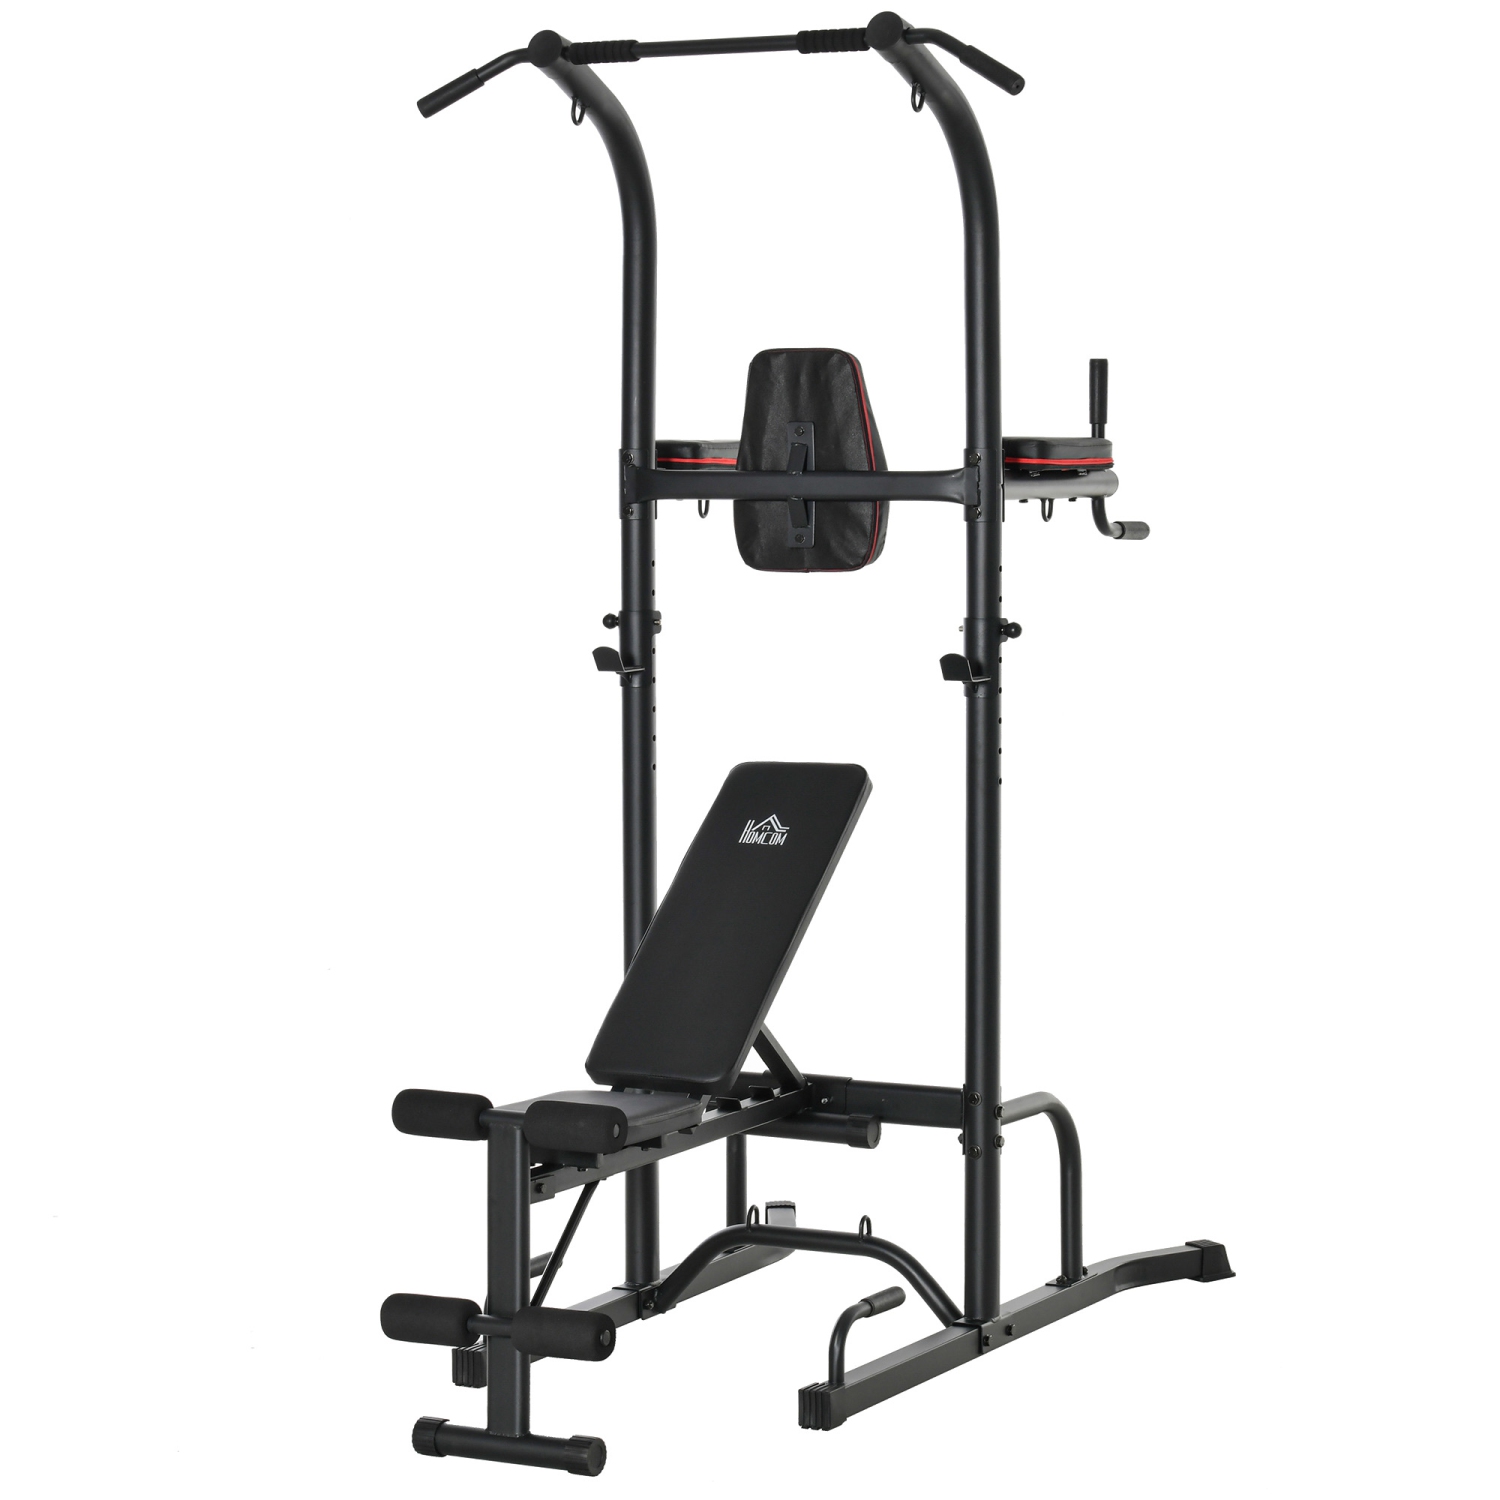 Soozier Multi-Function Training Stand Power Tower Station Gym Workout Equipment with Sit Up Bench, Pull Up Bar, Black